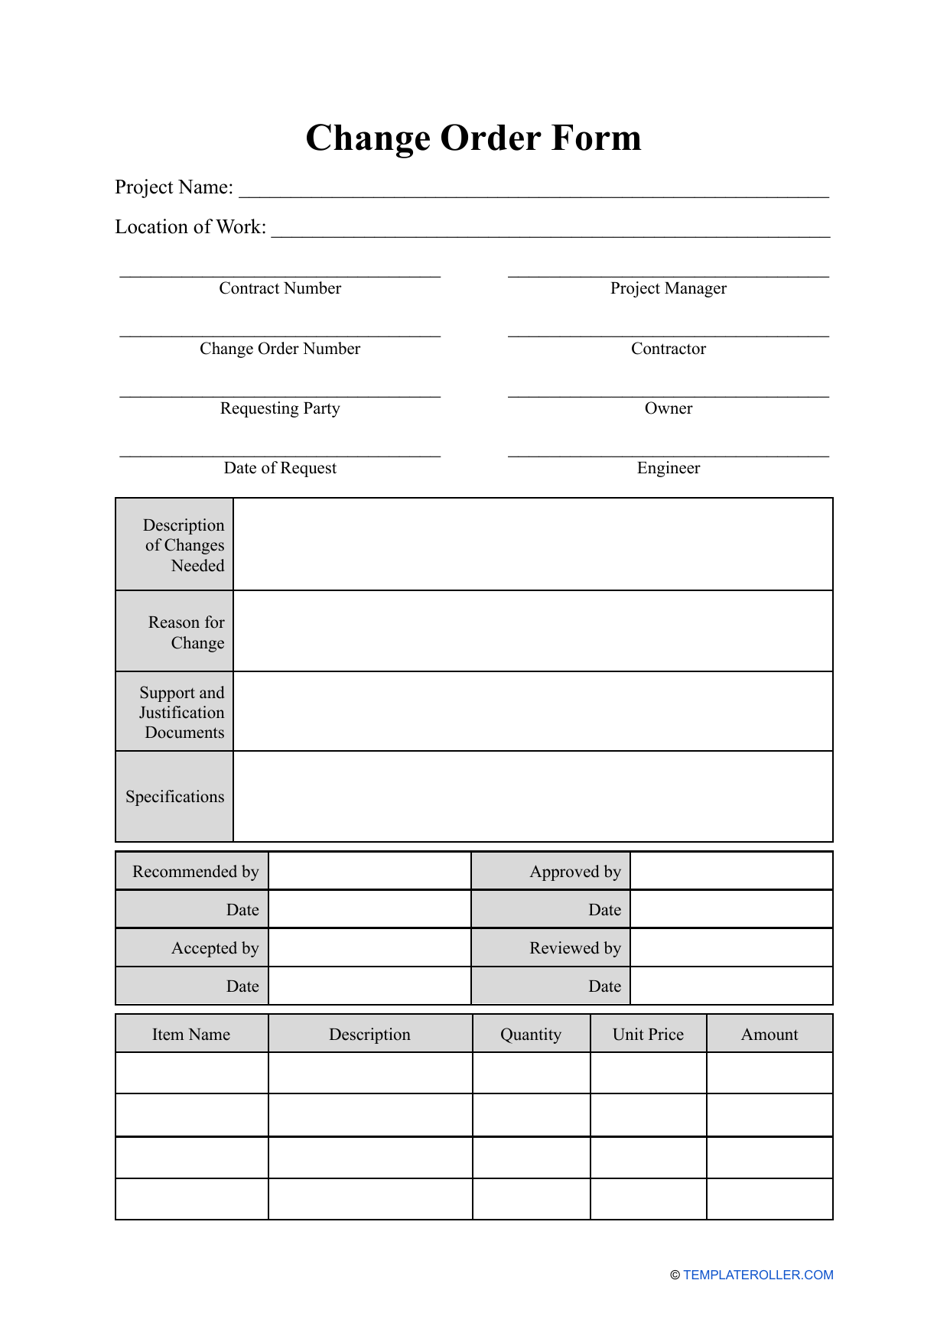 Change Order Form Template, Page 1